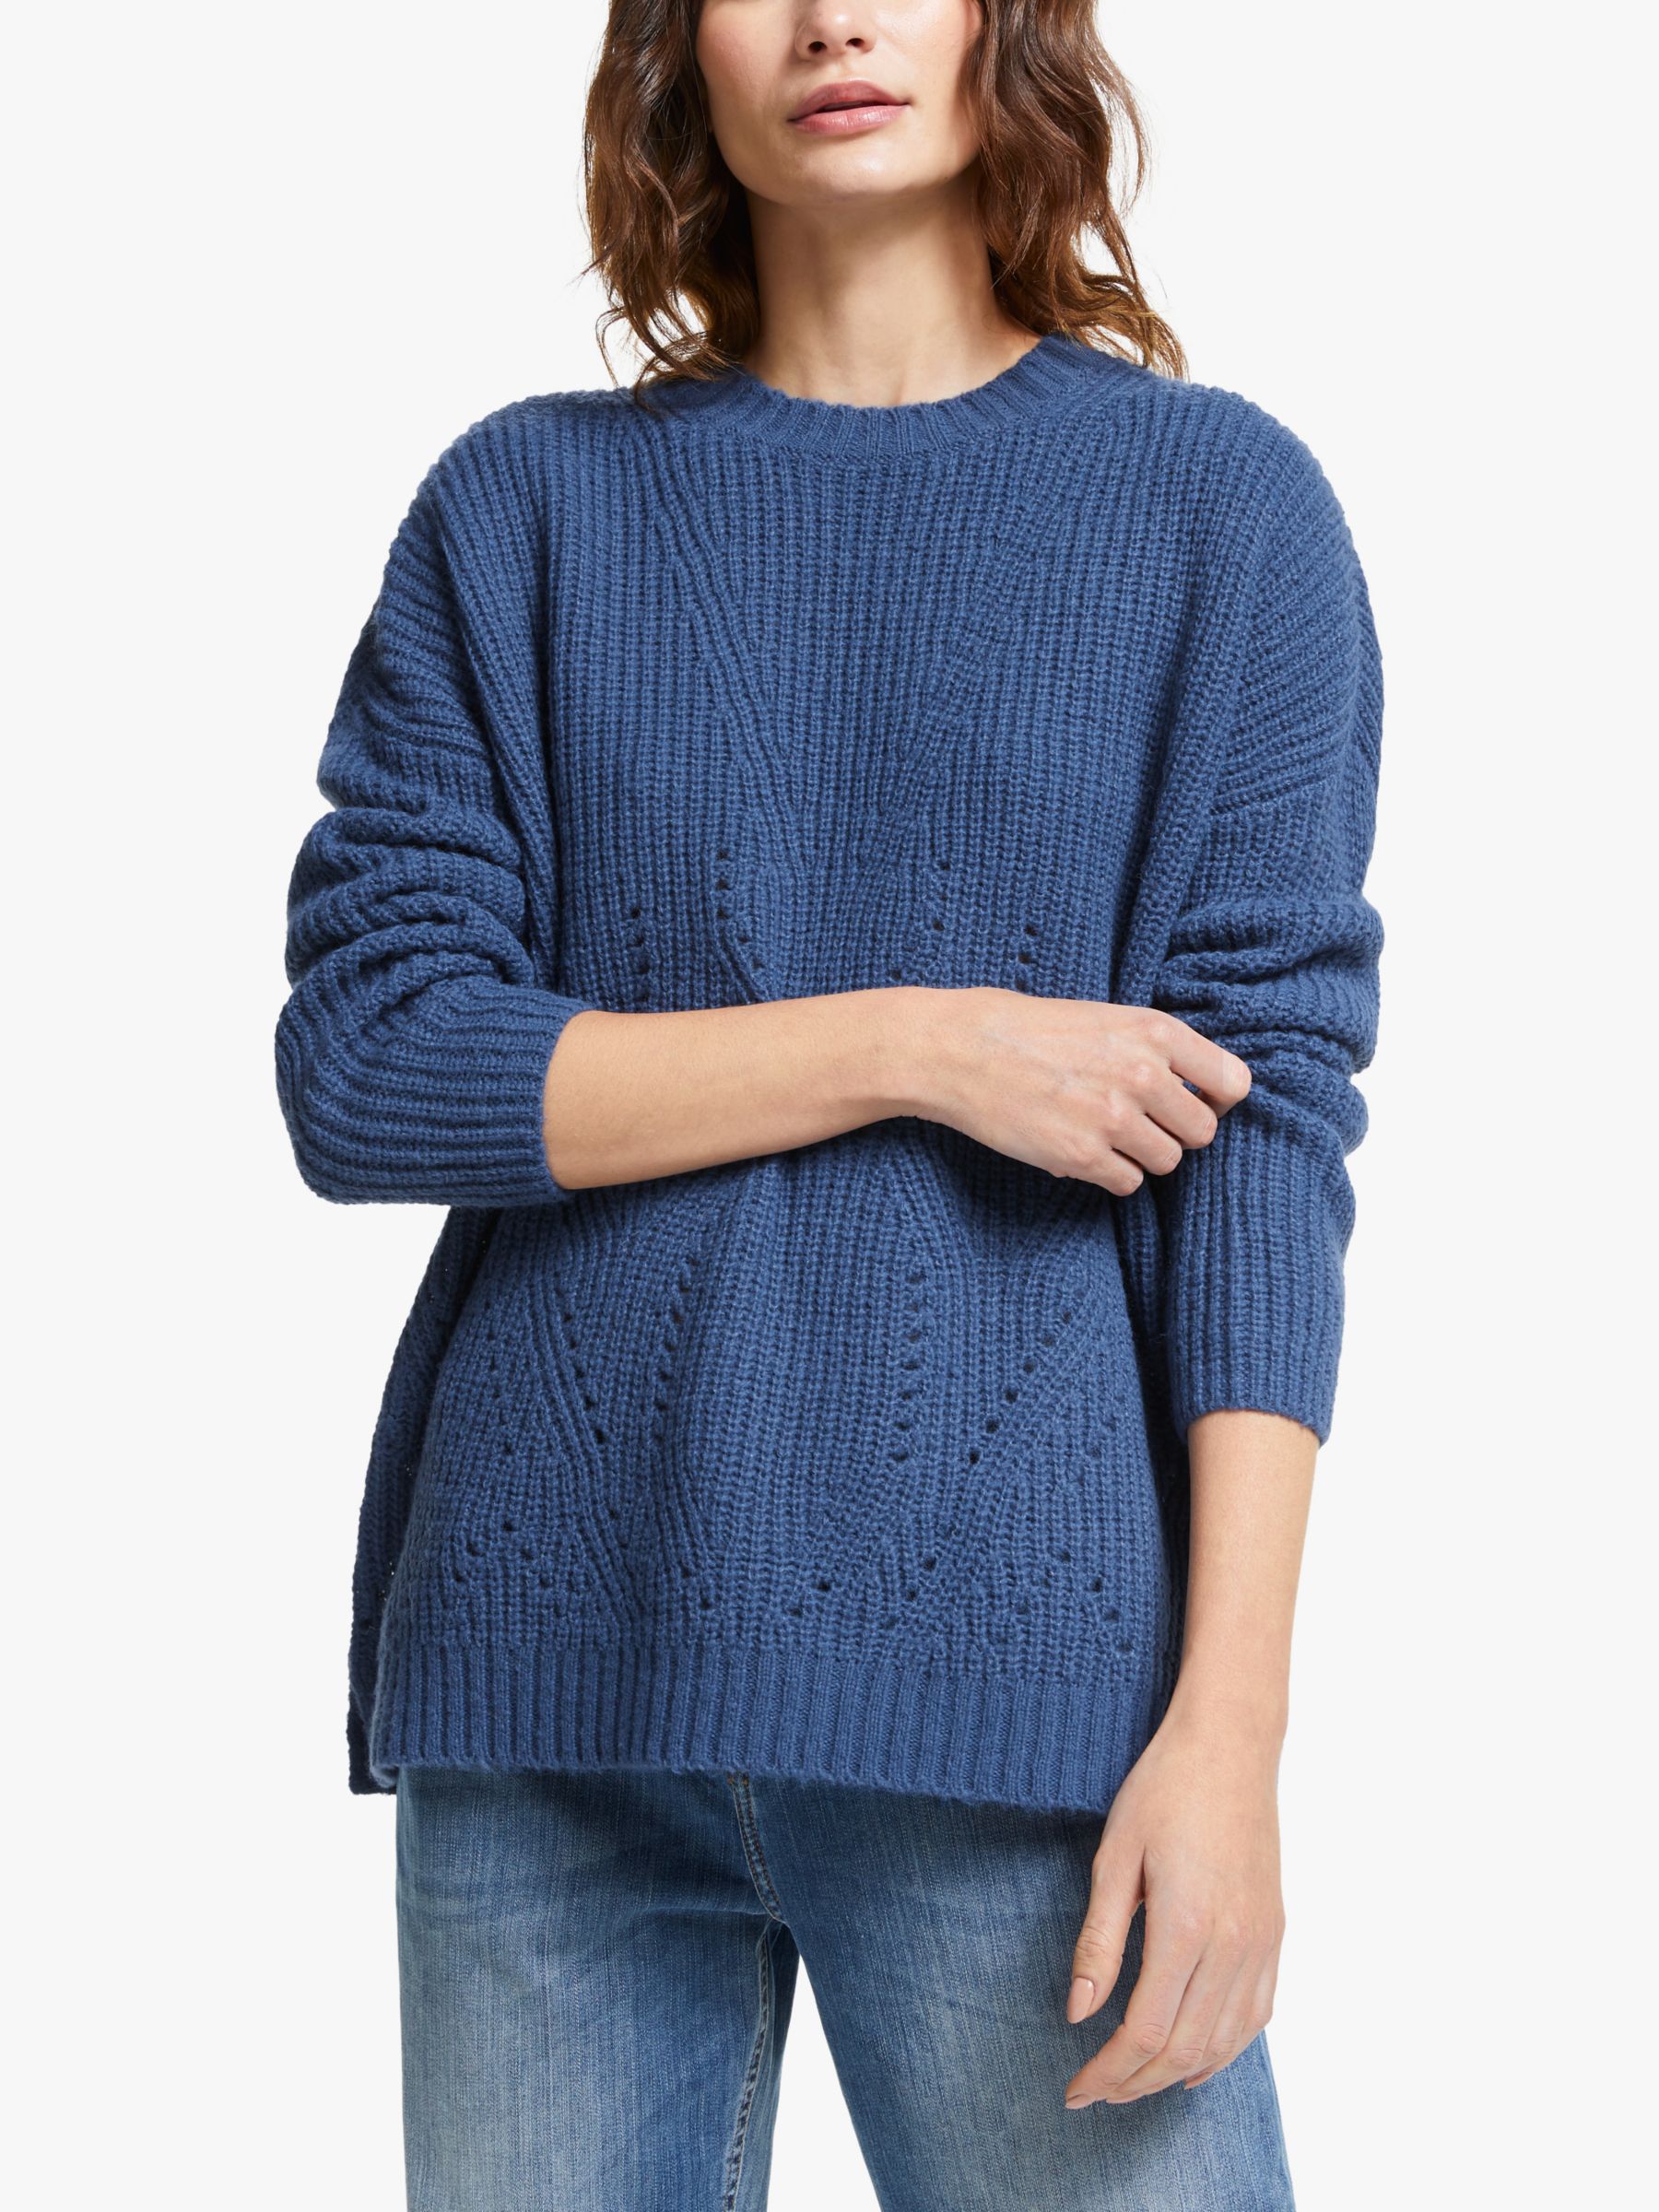 AND/OR Stacey Textured Knit Jumper